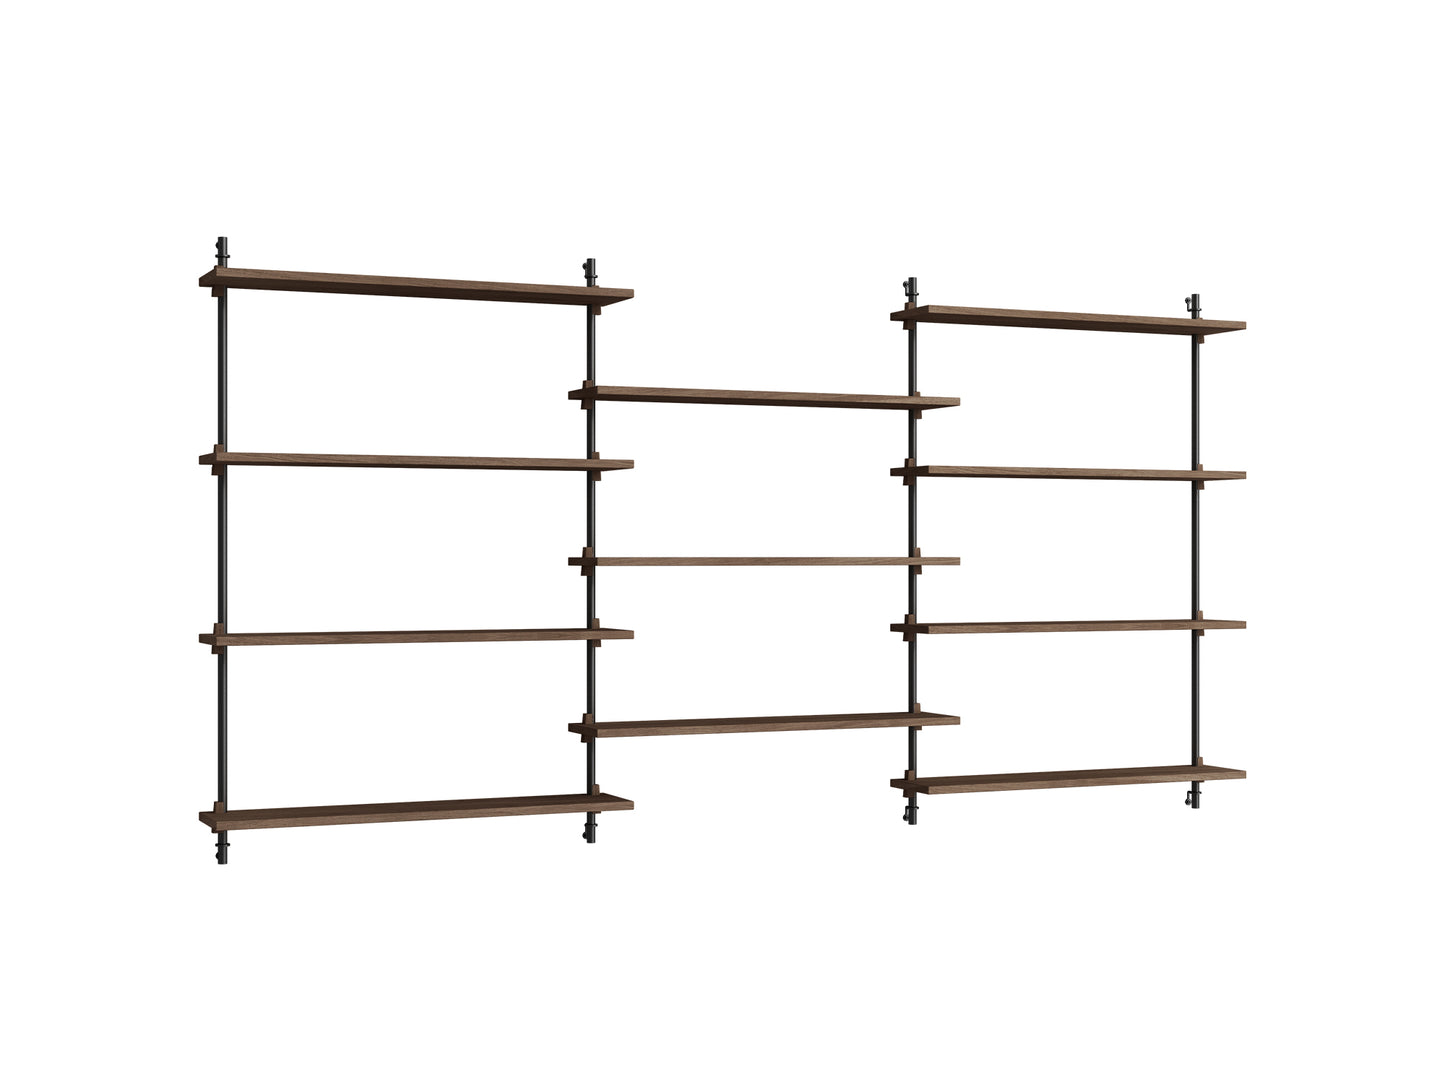 Wall Shelving System Sets (115 cm) by Moebe - WS.115.3 / Black Uprights / Smoked Oak